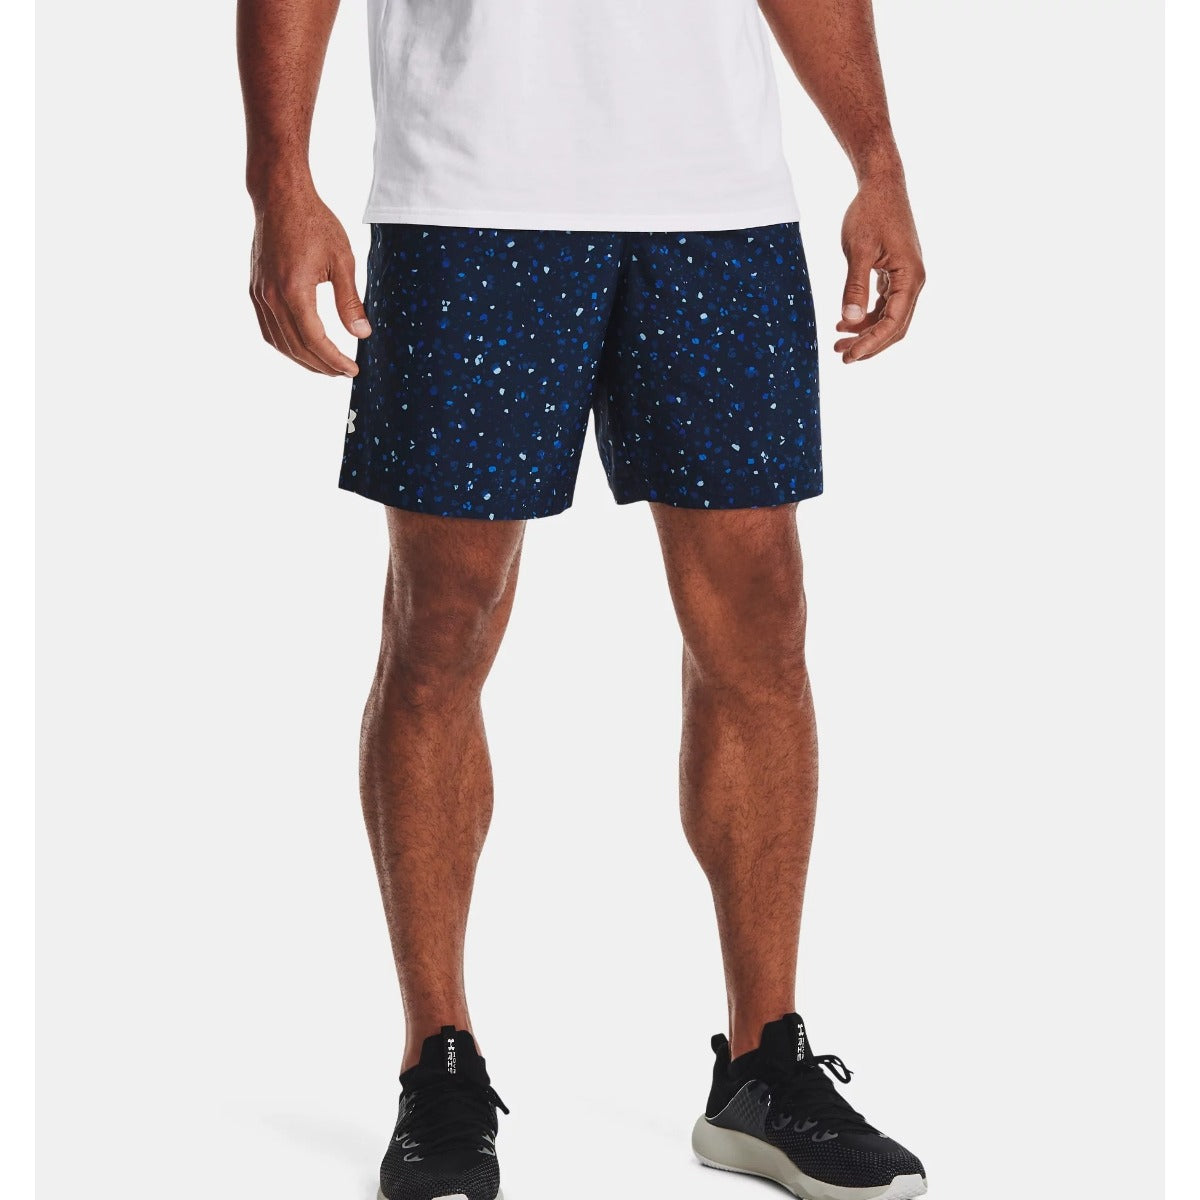 Under Armour Woven Adapt Shorts Mens (Navy 409)